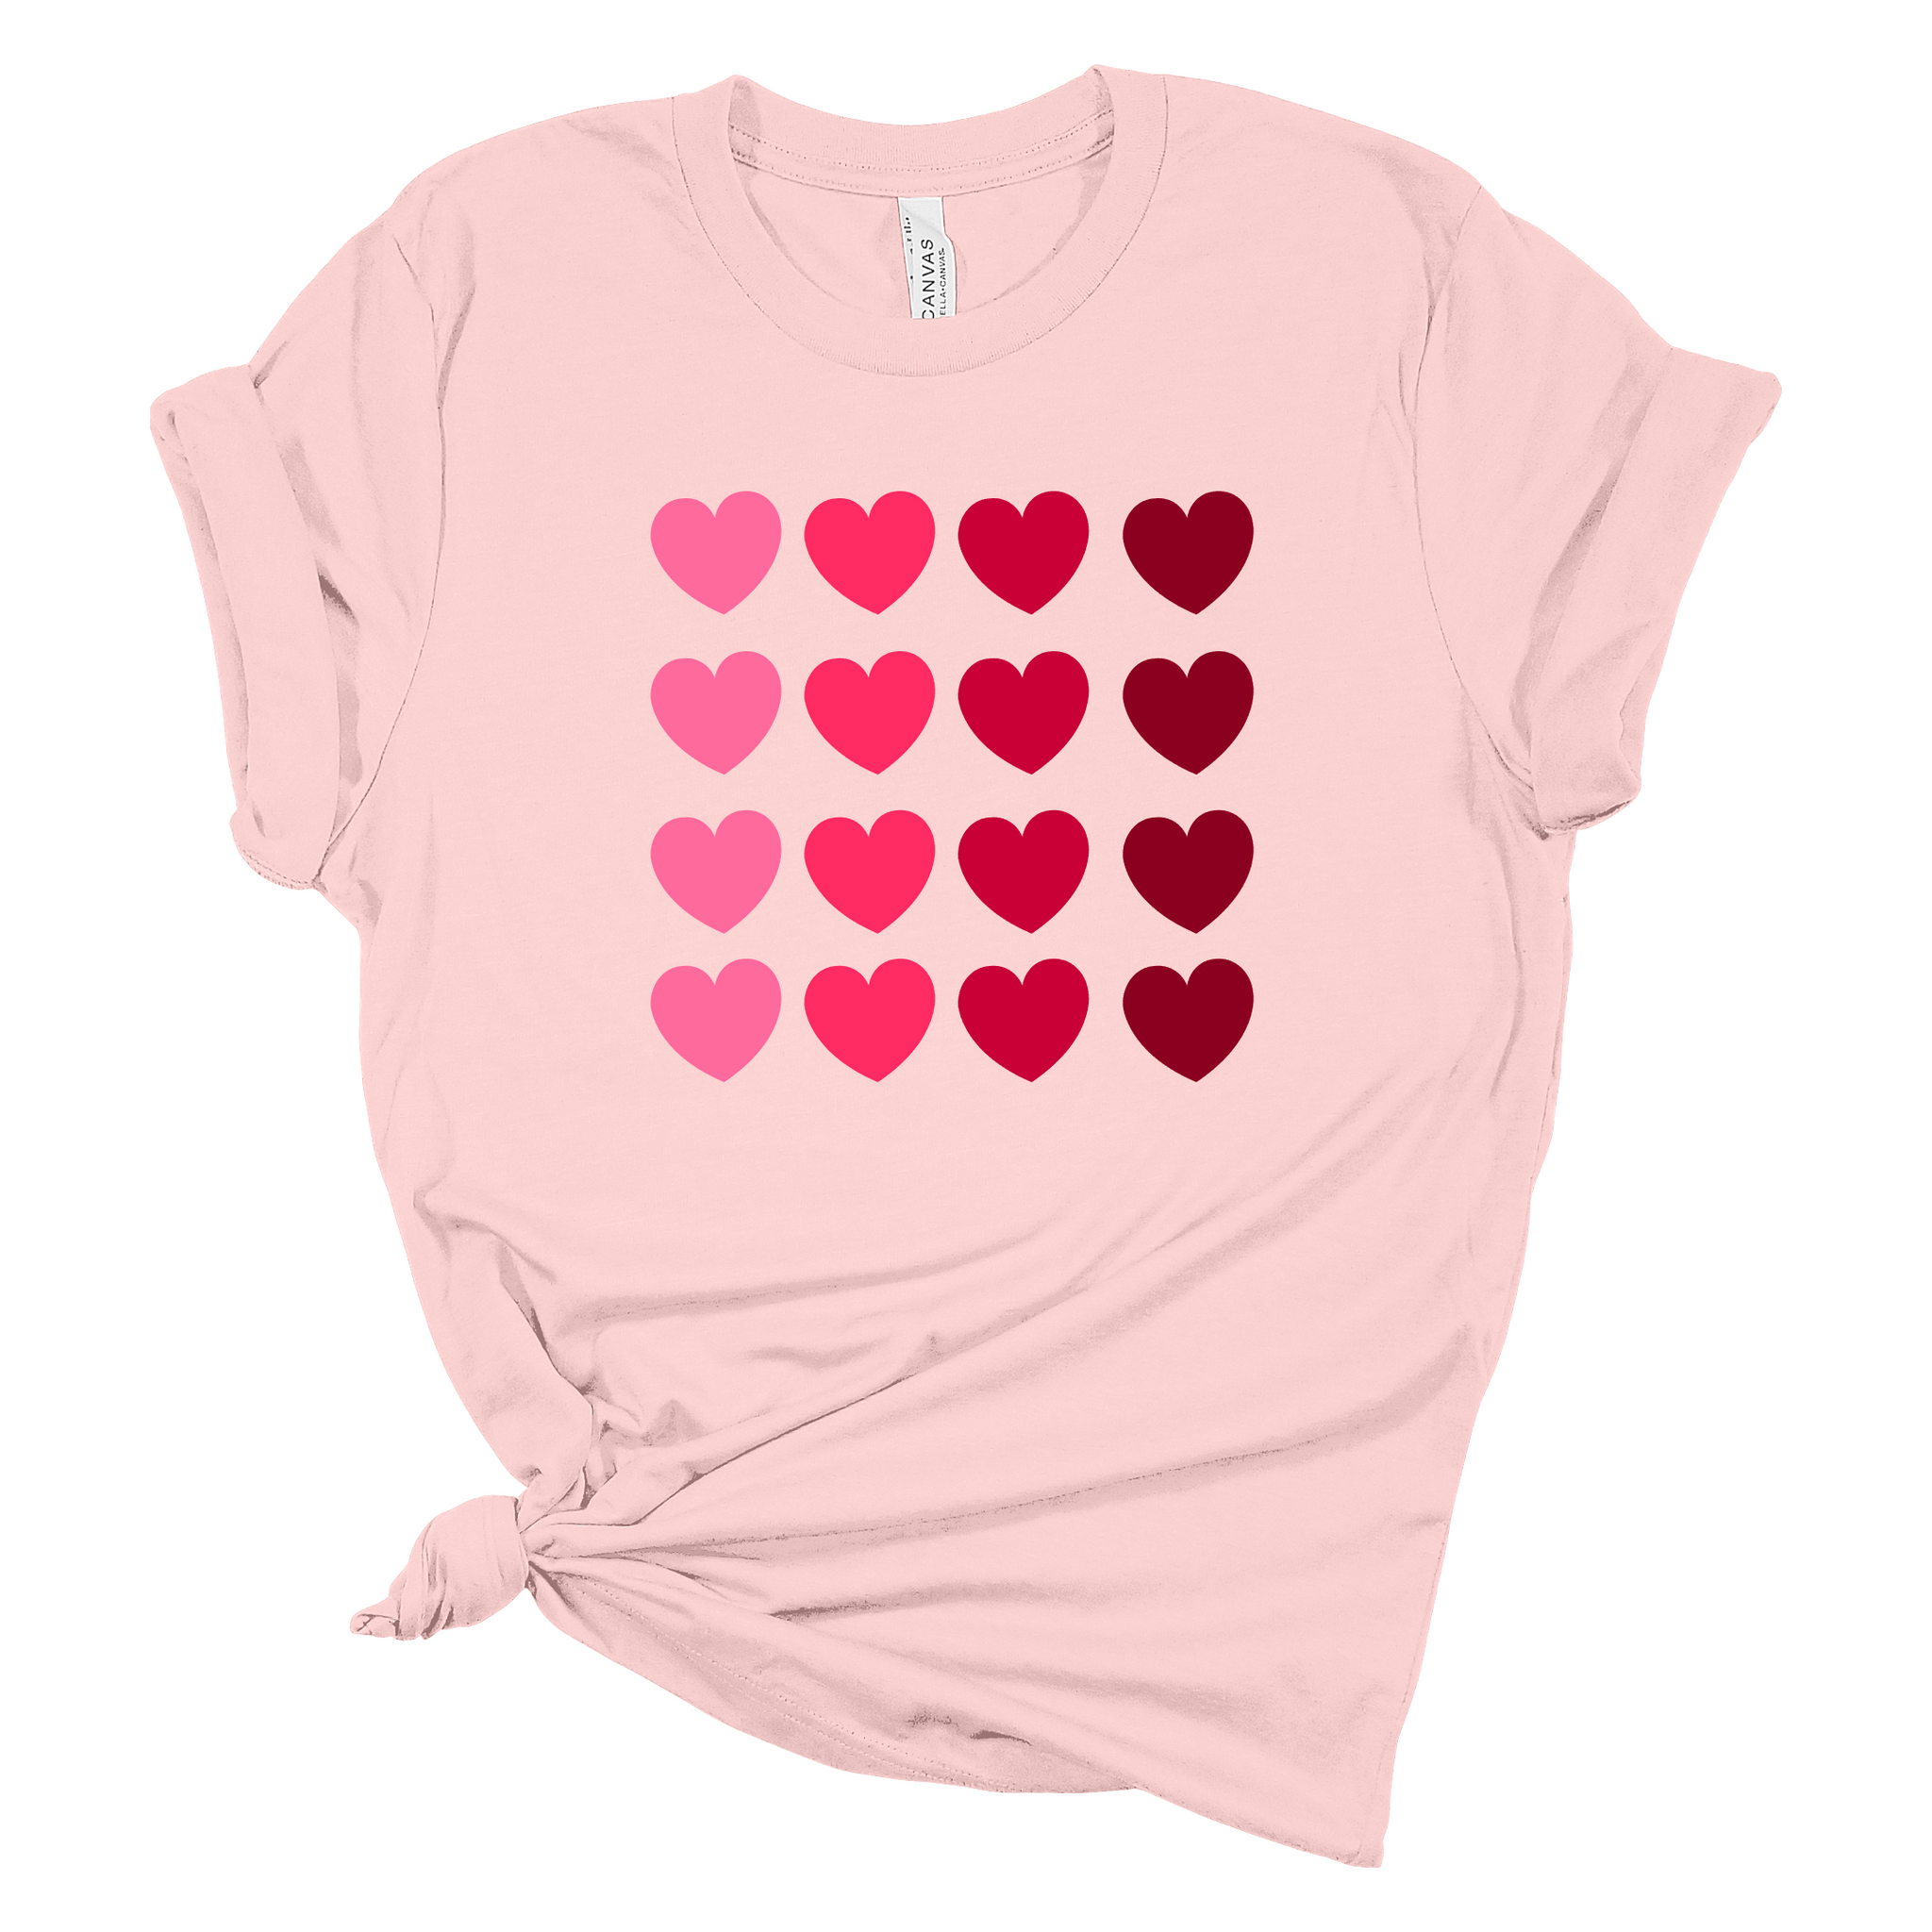 Valentine's Heart Ombre Grid on Light Pink Short Sleeve Tshirt - Women's Tshirts S009